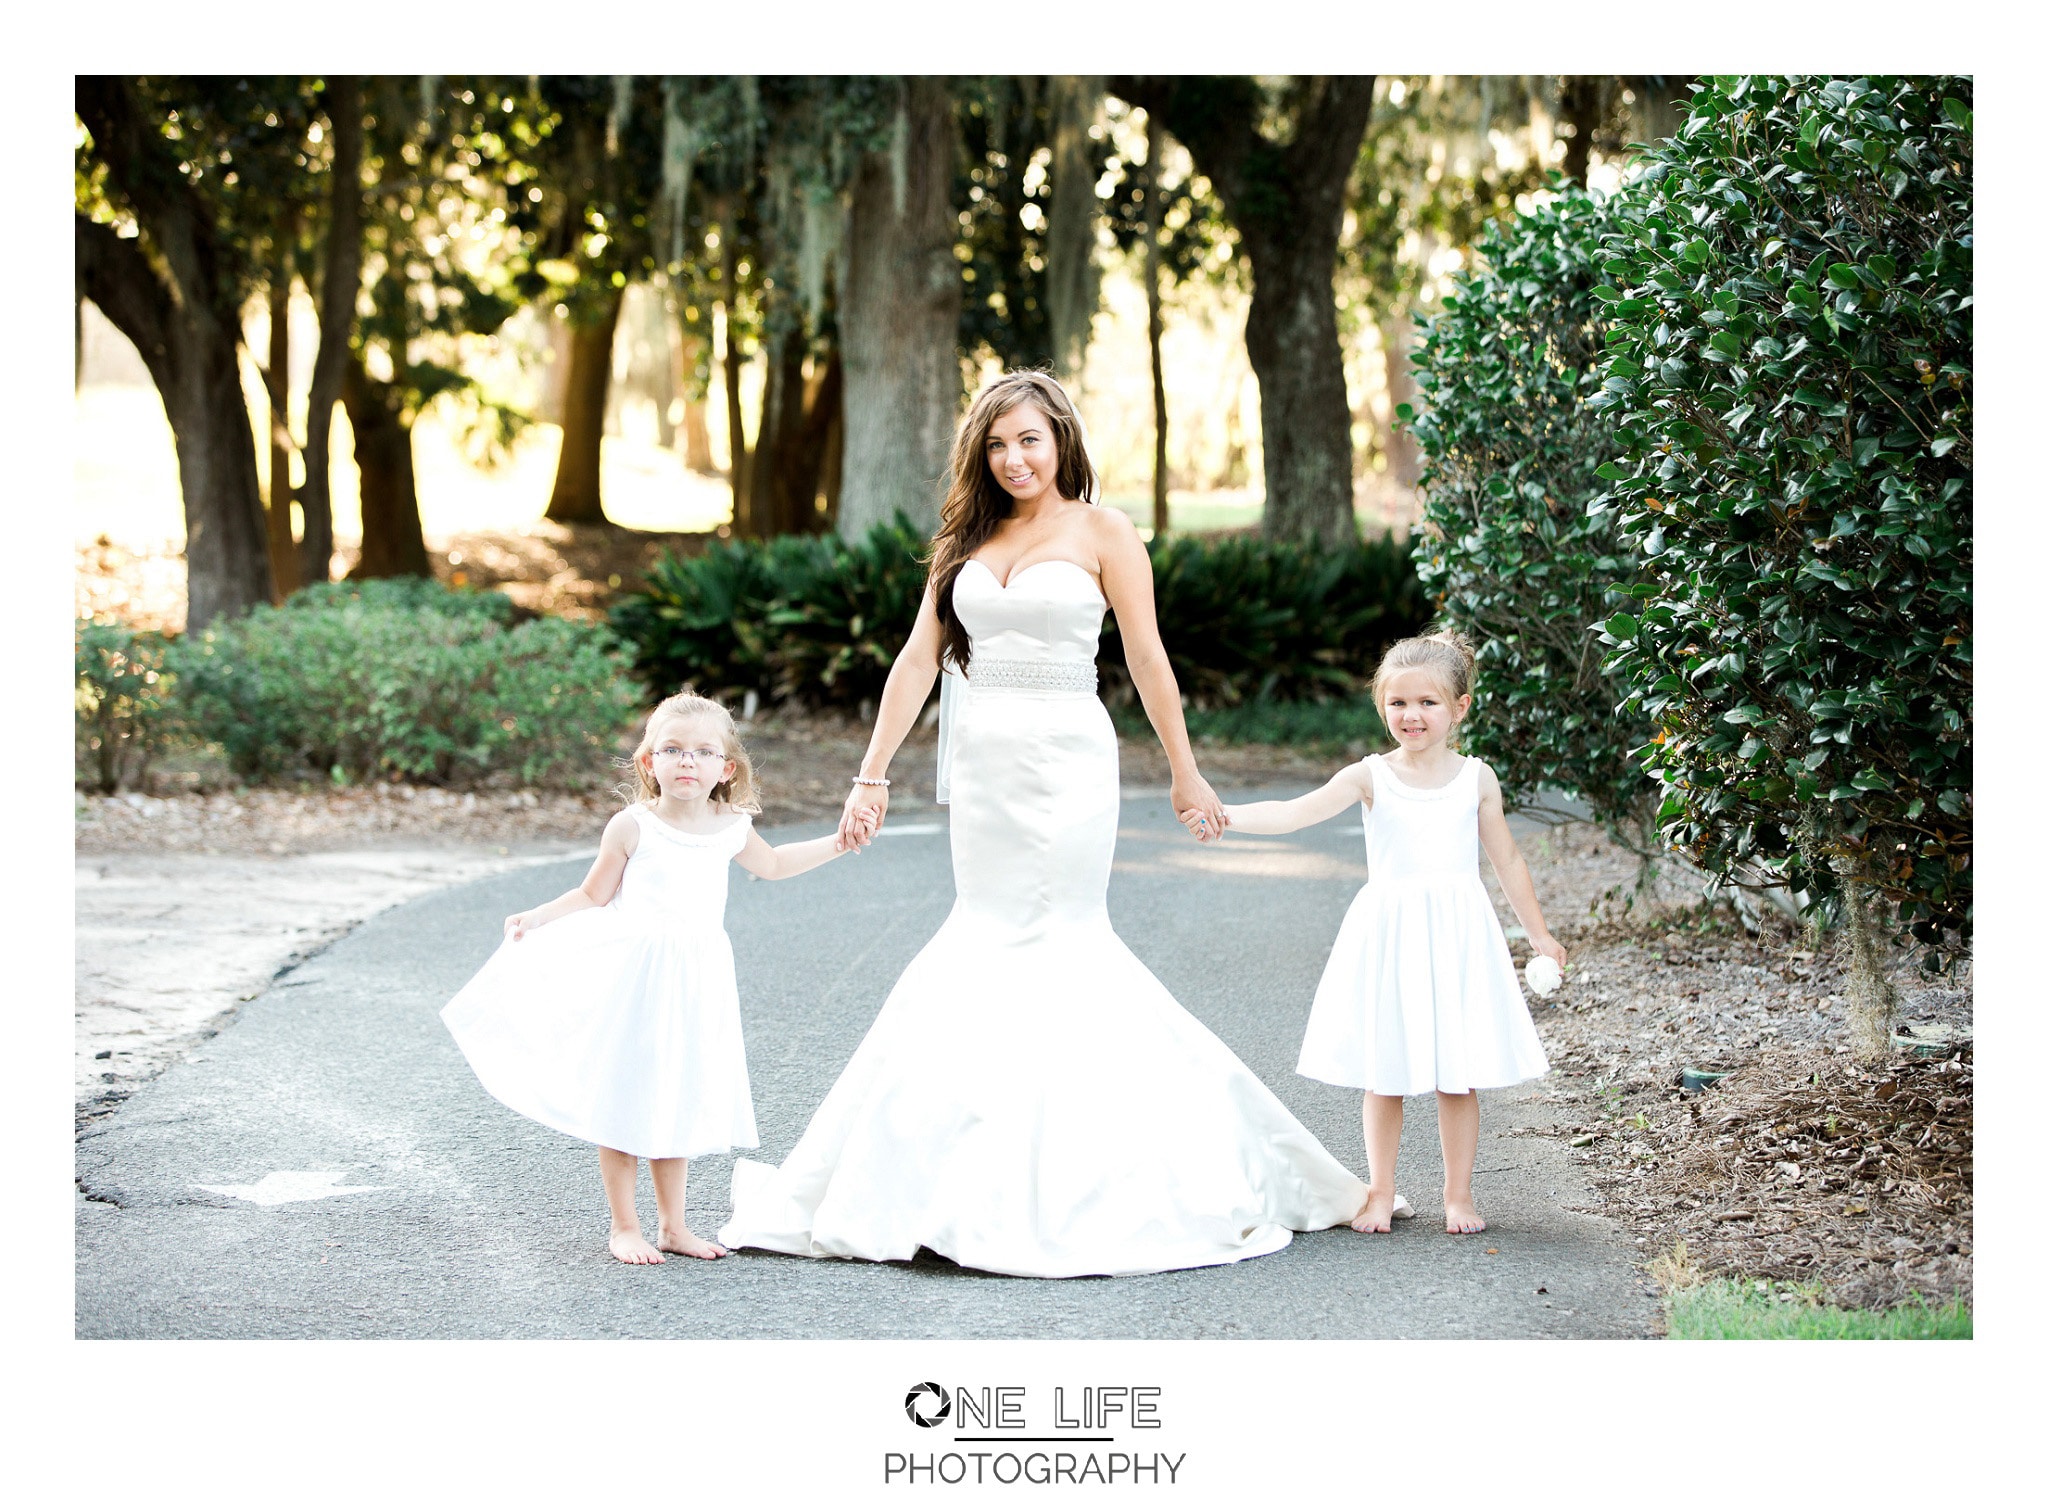 The bride and her flower girls in white on the walkway, Kay and Josh's wedding at the Heritage Plantation, Pawleys Island, South Carolina on September 19, 2015 Heritage Plantation Southern wedding, Pawleys Island, South Carolina Venue and Catering: Heritage Club, Pawleys Island Music: Paul Matthews Entertainment Brides dress: The Little White Dress Cake: Buttercream Cakes and Catering Event Rentals: Eventworks Photographer: One Life Photography